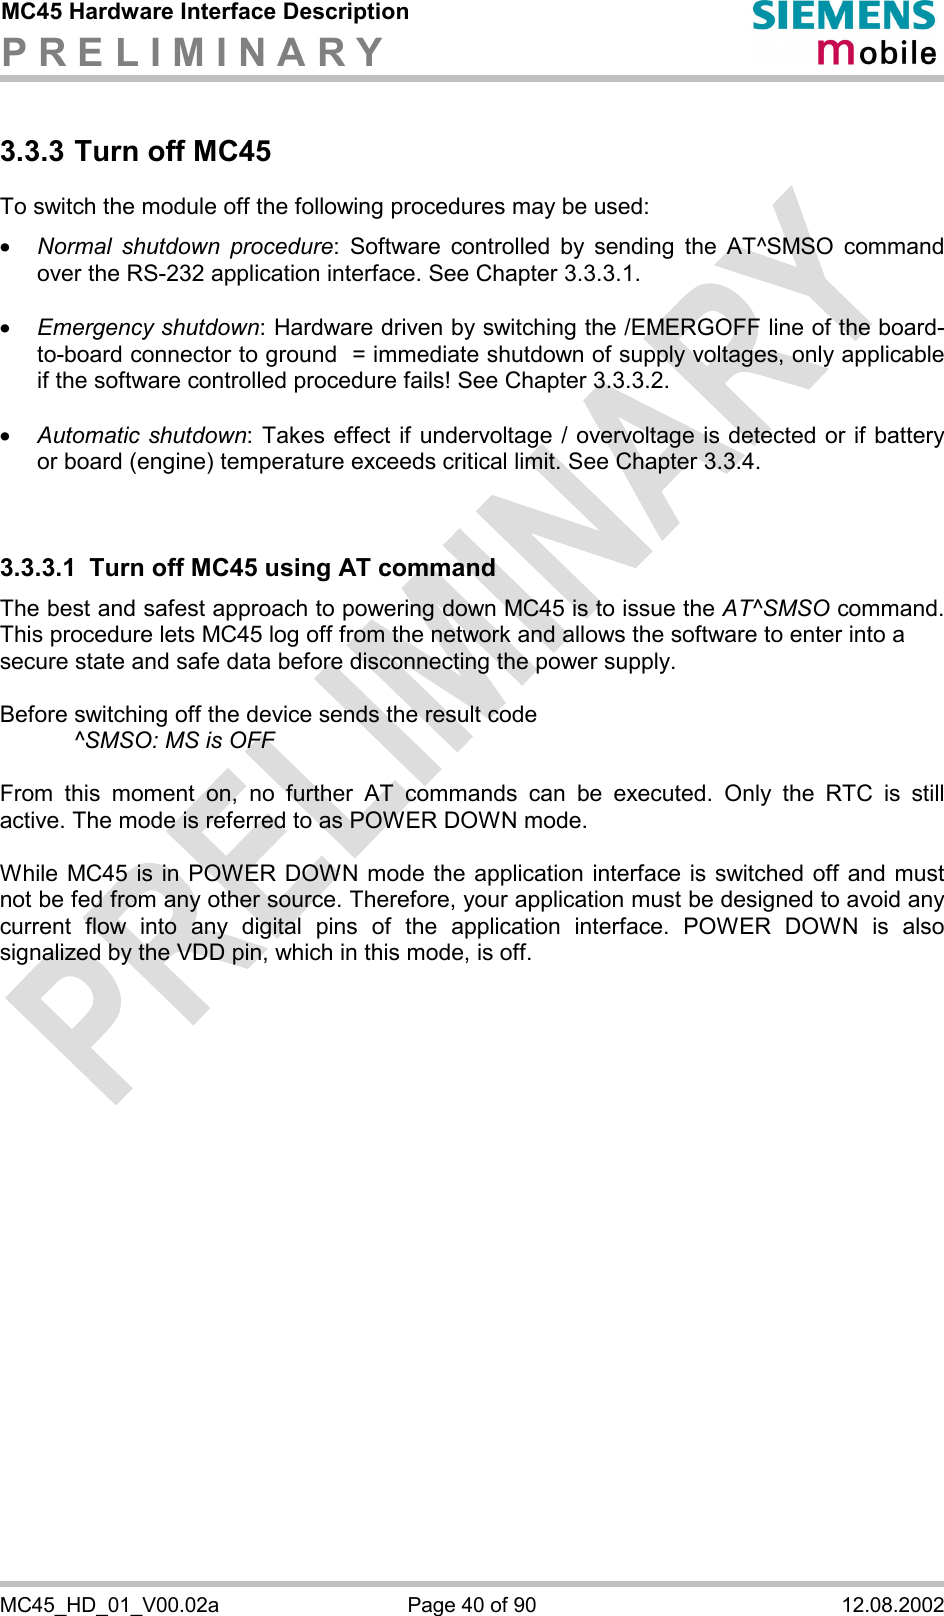 MC45 Hardware Interface Description P R E L I M I N A R Y      MC45_HD_01_V00.02a  Page 40 of 90  12.08.2002 3.3.3 Turn off MC45 To switch the module off the following procedures may be used:  ·  Normal shutdown procedure: Software controlled by sending the AT^SMSO command over the RS-232 application interface. See Chapter 3.3.3.1.  ·  Emergency shutdown: Hardware driven by switching the /EMERGOFF line of the board-to-board connector to ground  = immediate shutdown of supply voltages, only applicable if the software controlled procedure fails! See Chapter 3.3.3.2.  ·  Automatic shutdown: Takes effect if undervoltage / overvoltage is detected or if battery or board (engine) temperature exceeds critical limit. See Chapter 3.3.4.   3.3.3.1  Turn off MC45 using AT command The best and safest approach to powering down MC45 is to issue the AT^SMSO command. This procedure lets MC45 log off from the network and allows the software to enter into a  secure state and safe data before disconnecting the power supply.  Before switching off the device sends the result code      ^SMSO: MS is OFF  From this moment on, no further AT commands can be executed. Only the RTC is still active. The mode is referred to as POWER DOWN mode.   While MC45 is in POWER DOWN mode the application interface is switched off and must not be fed from any other source. Therefore, your application must be designed to avoid any current flow into any digital pins of the application interface. POWER DOWN is also signalized by the VDD pin, which in this mode, is off.  